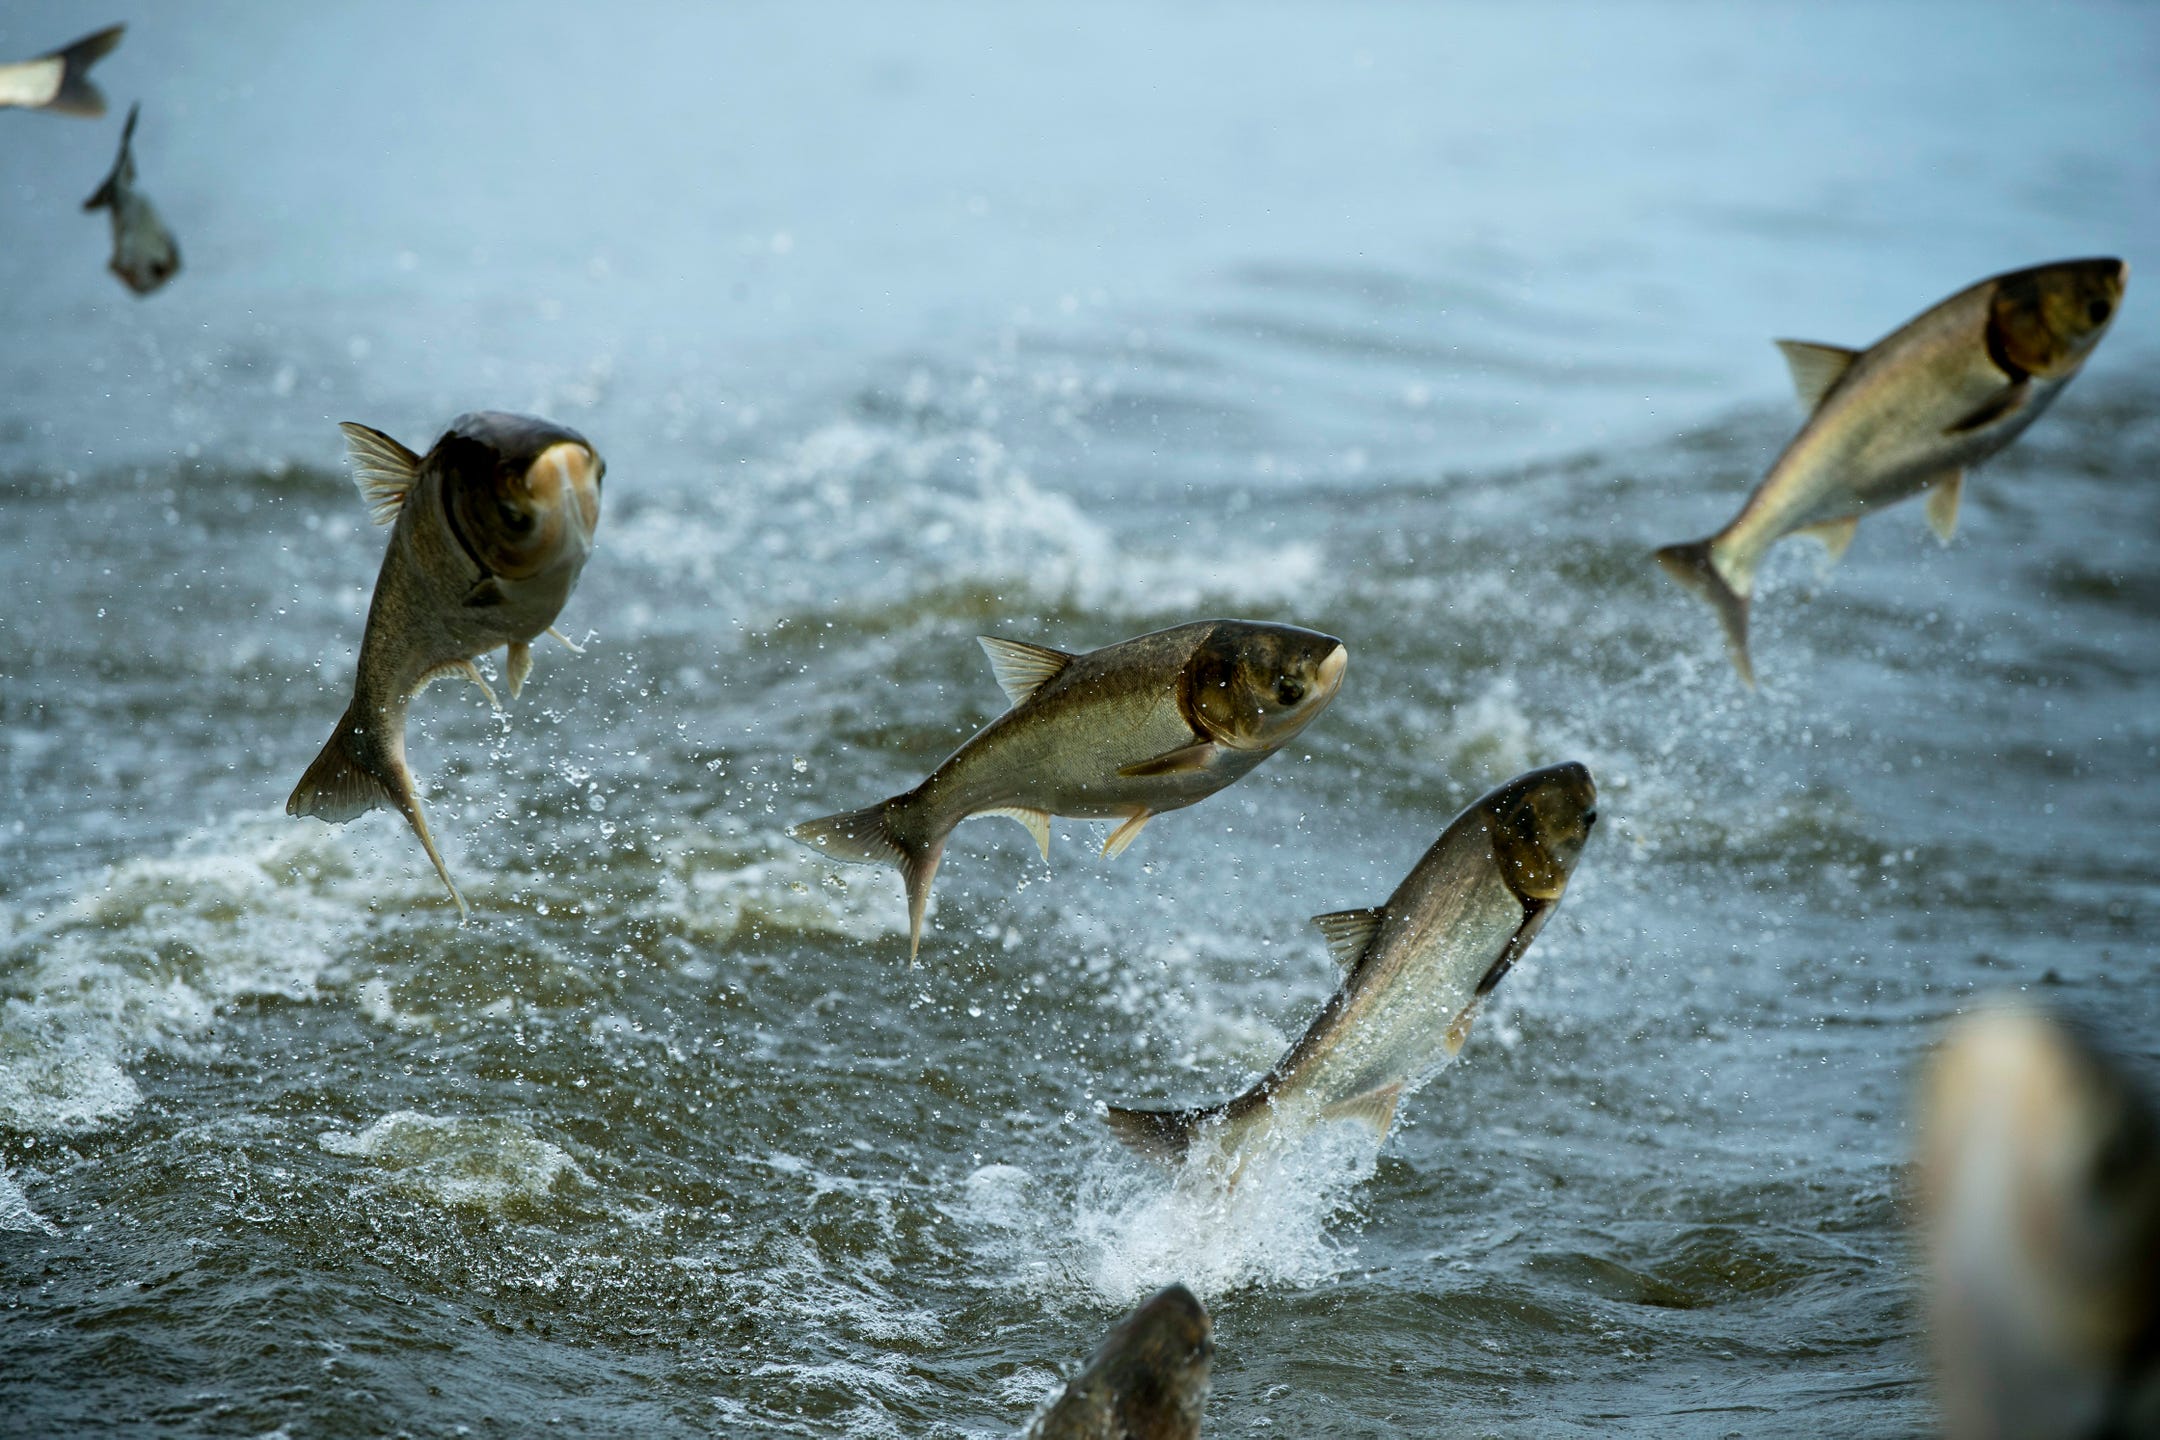 Yearslong war on Asian carp showing some progress, but end is